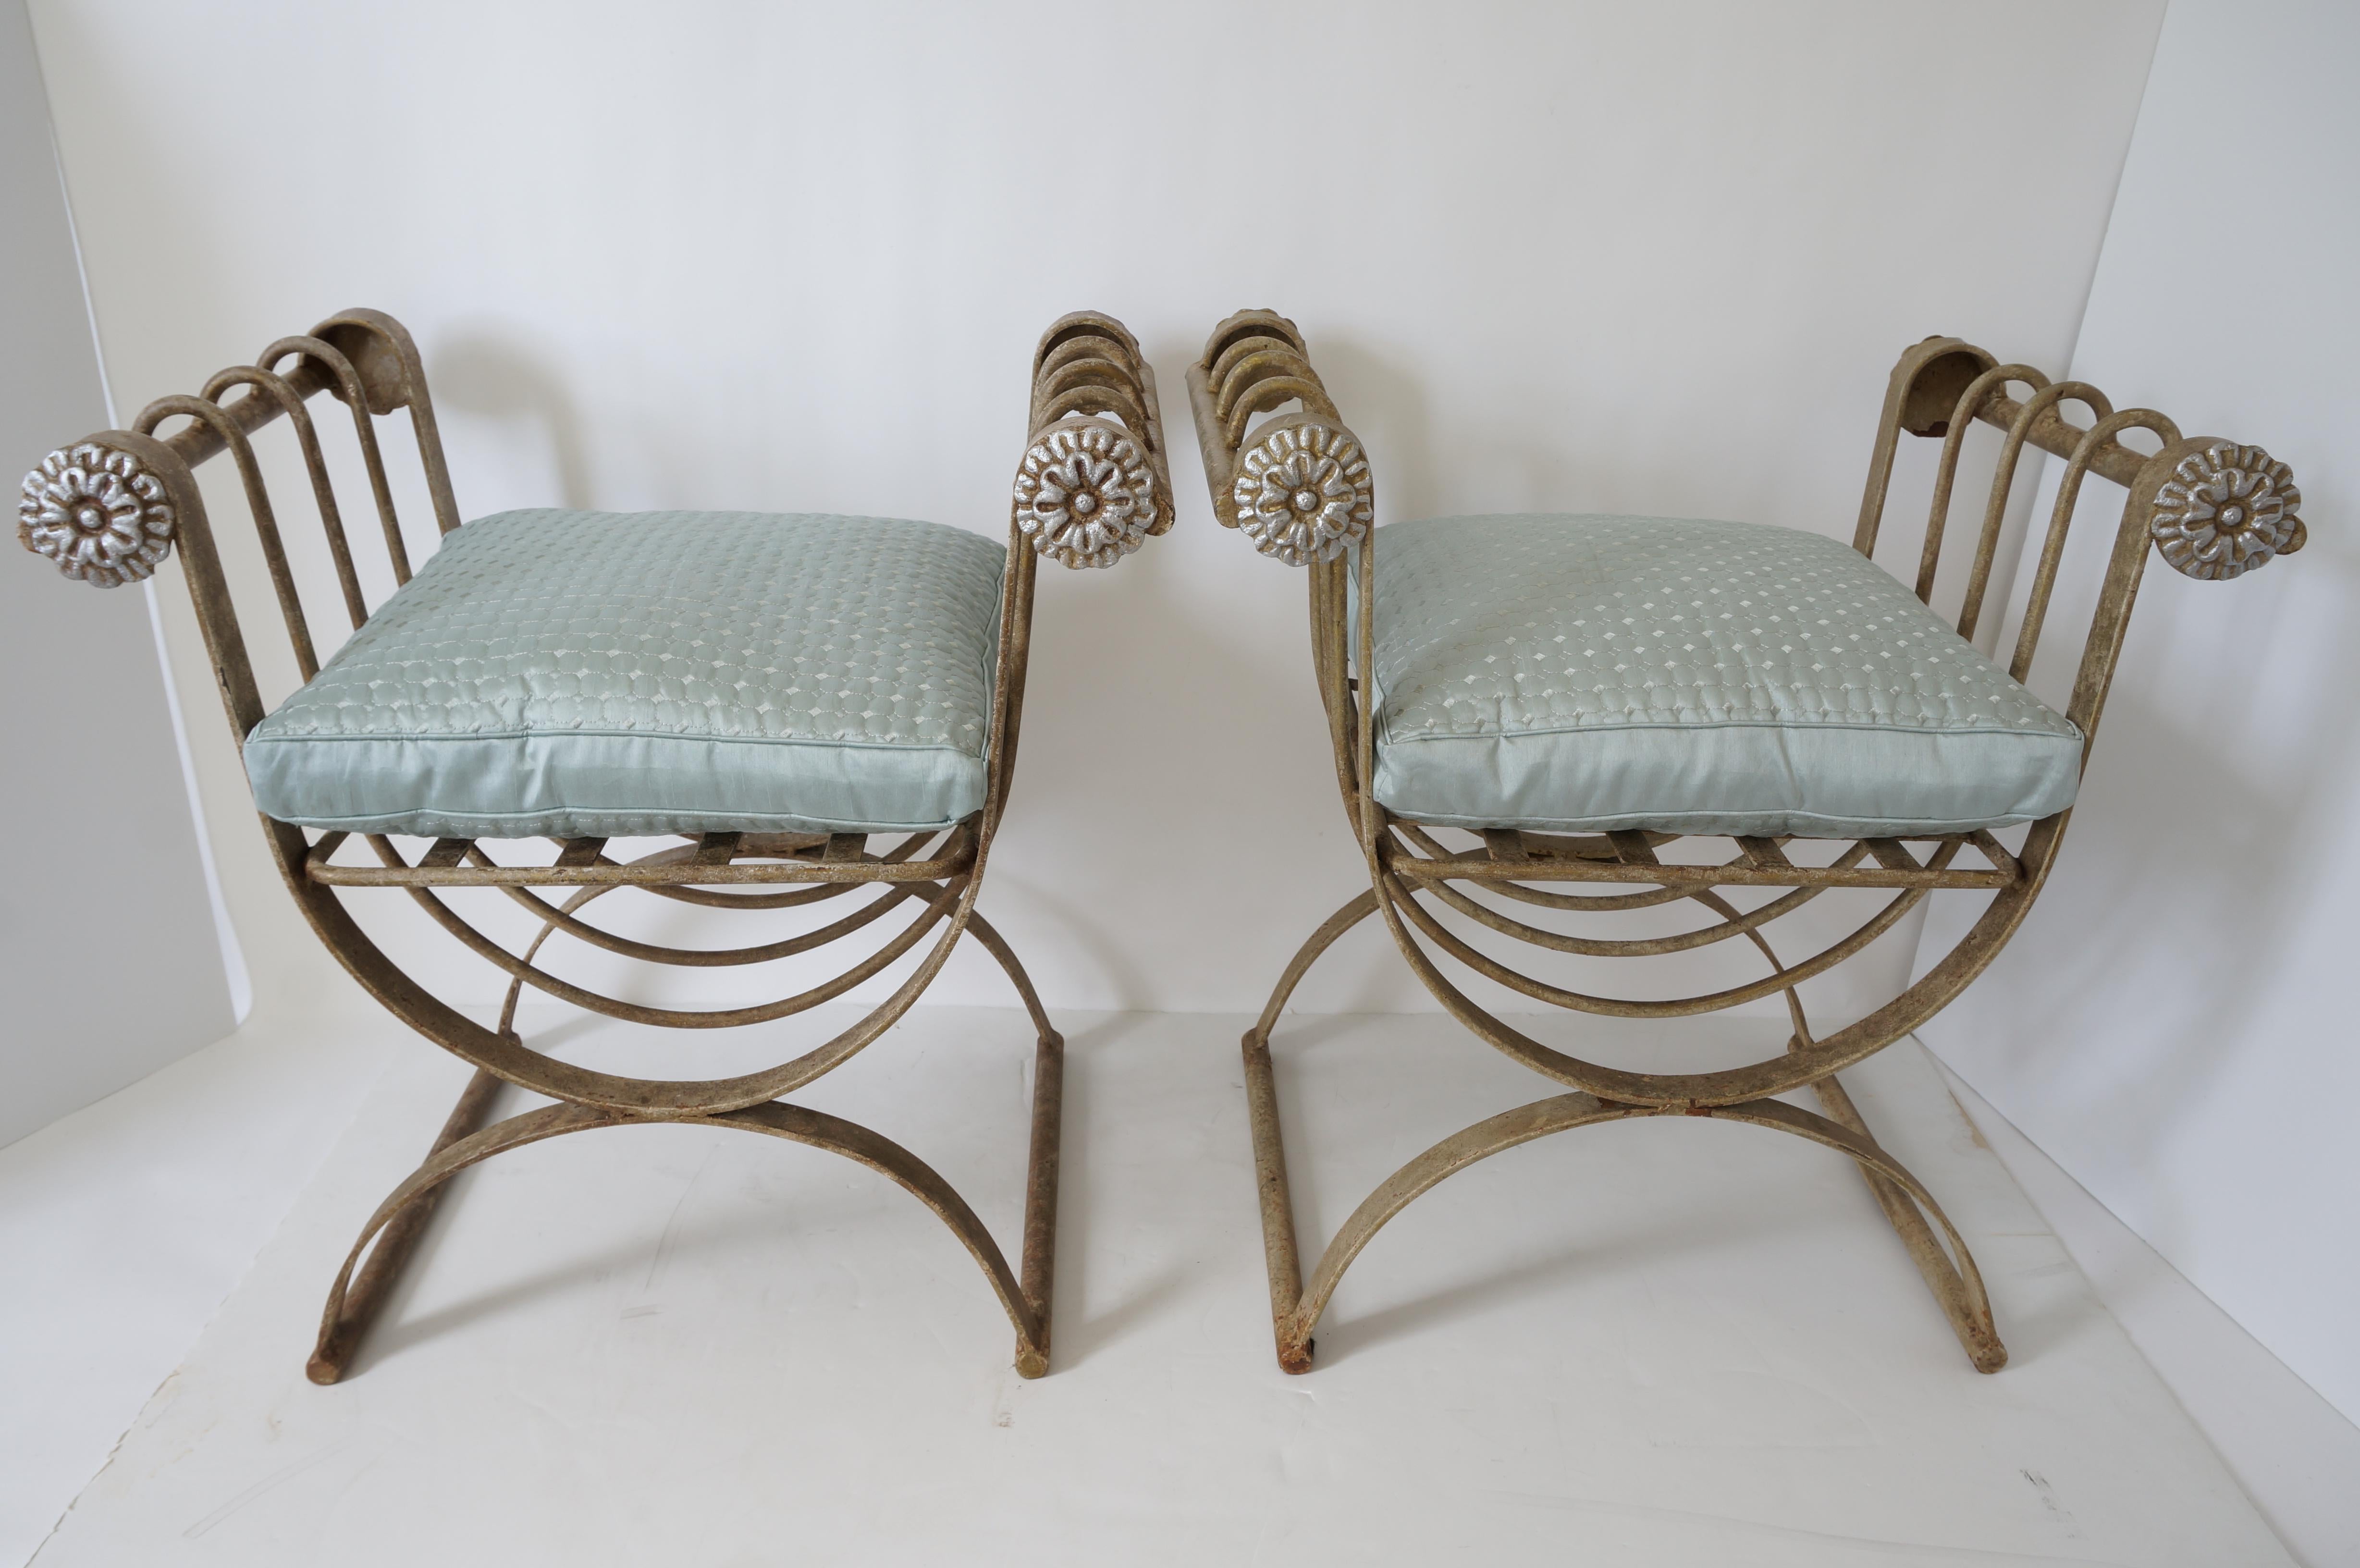 This stylish pair of iron curule-form benches have an antique painted beige/tan finish and the rosettes are a silver tone.

Note: Seat height without the cushion is 15.75